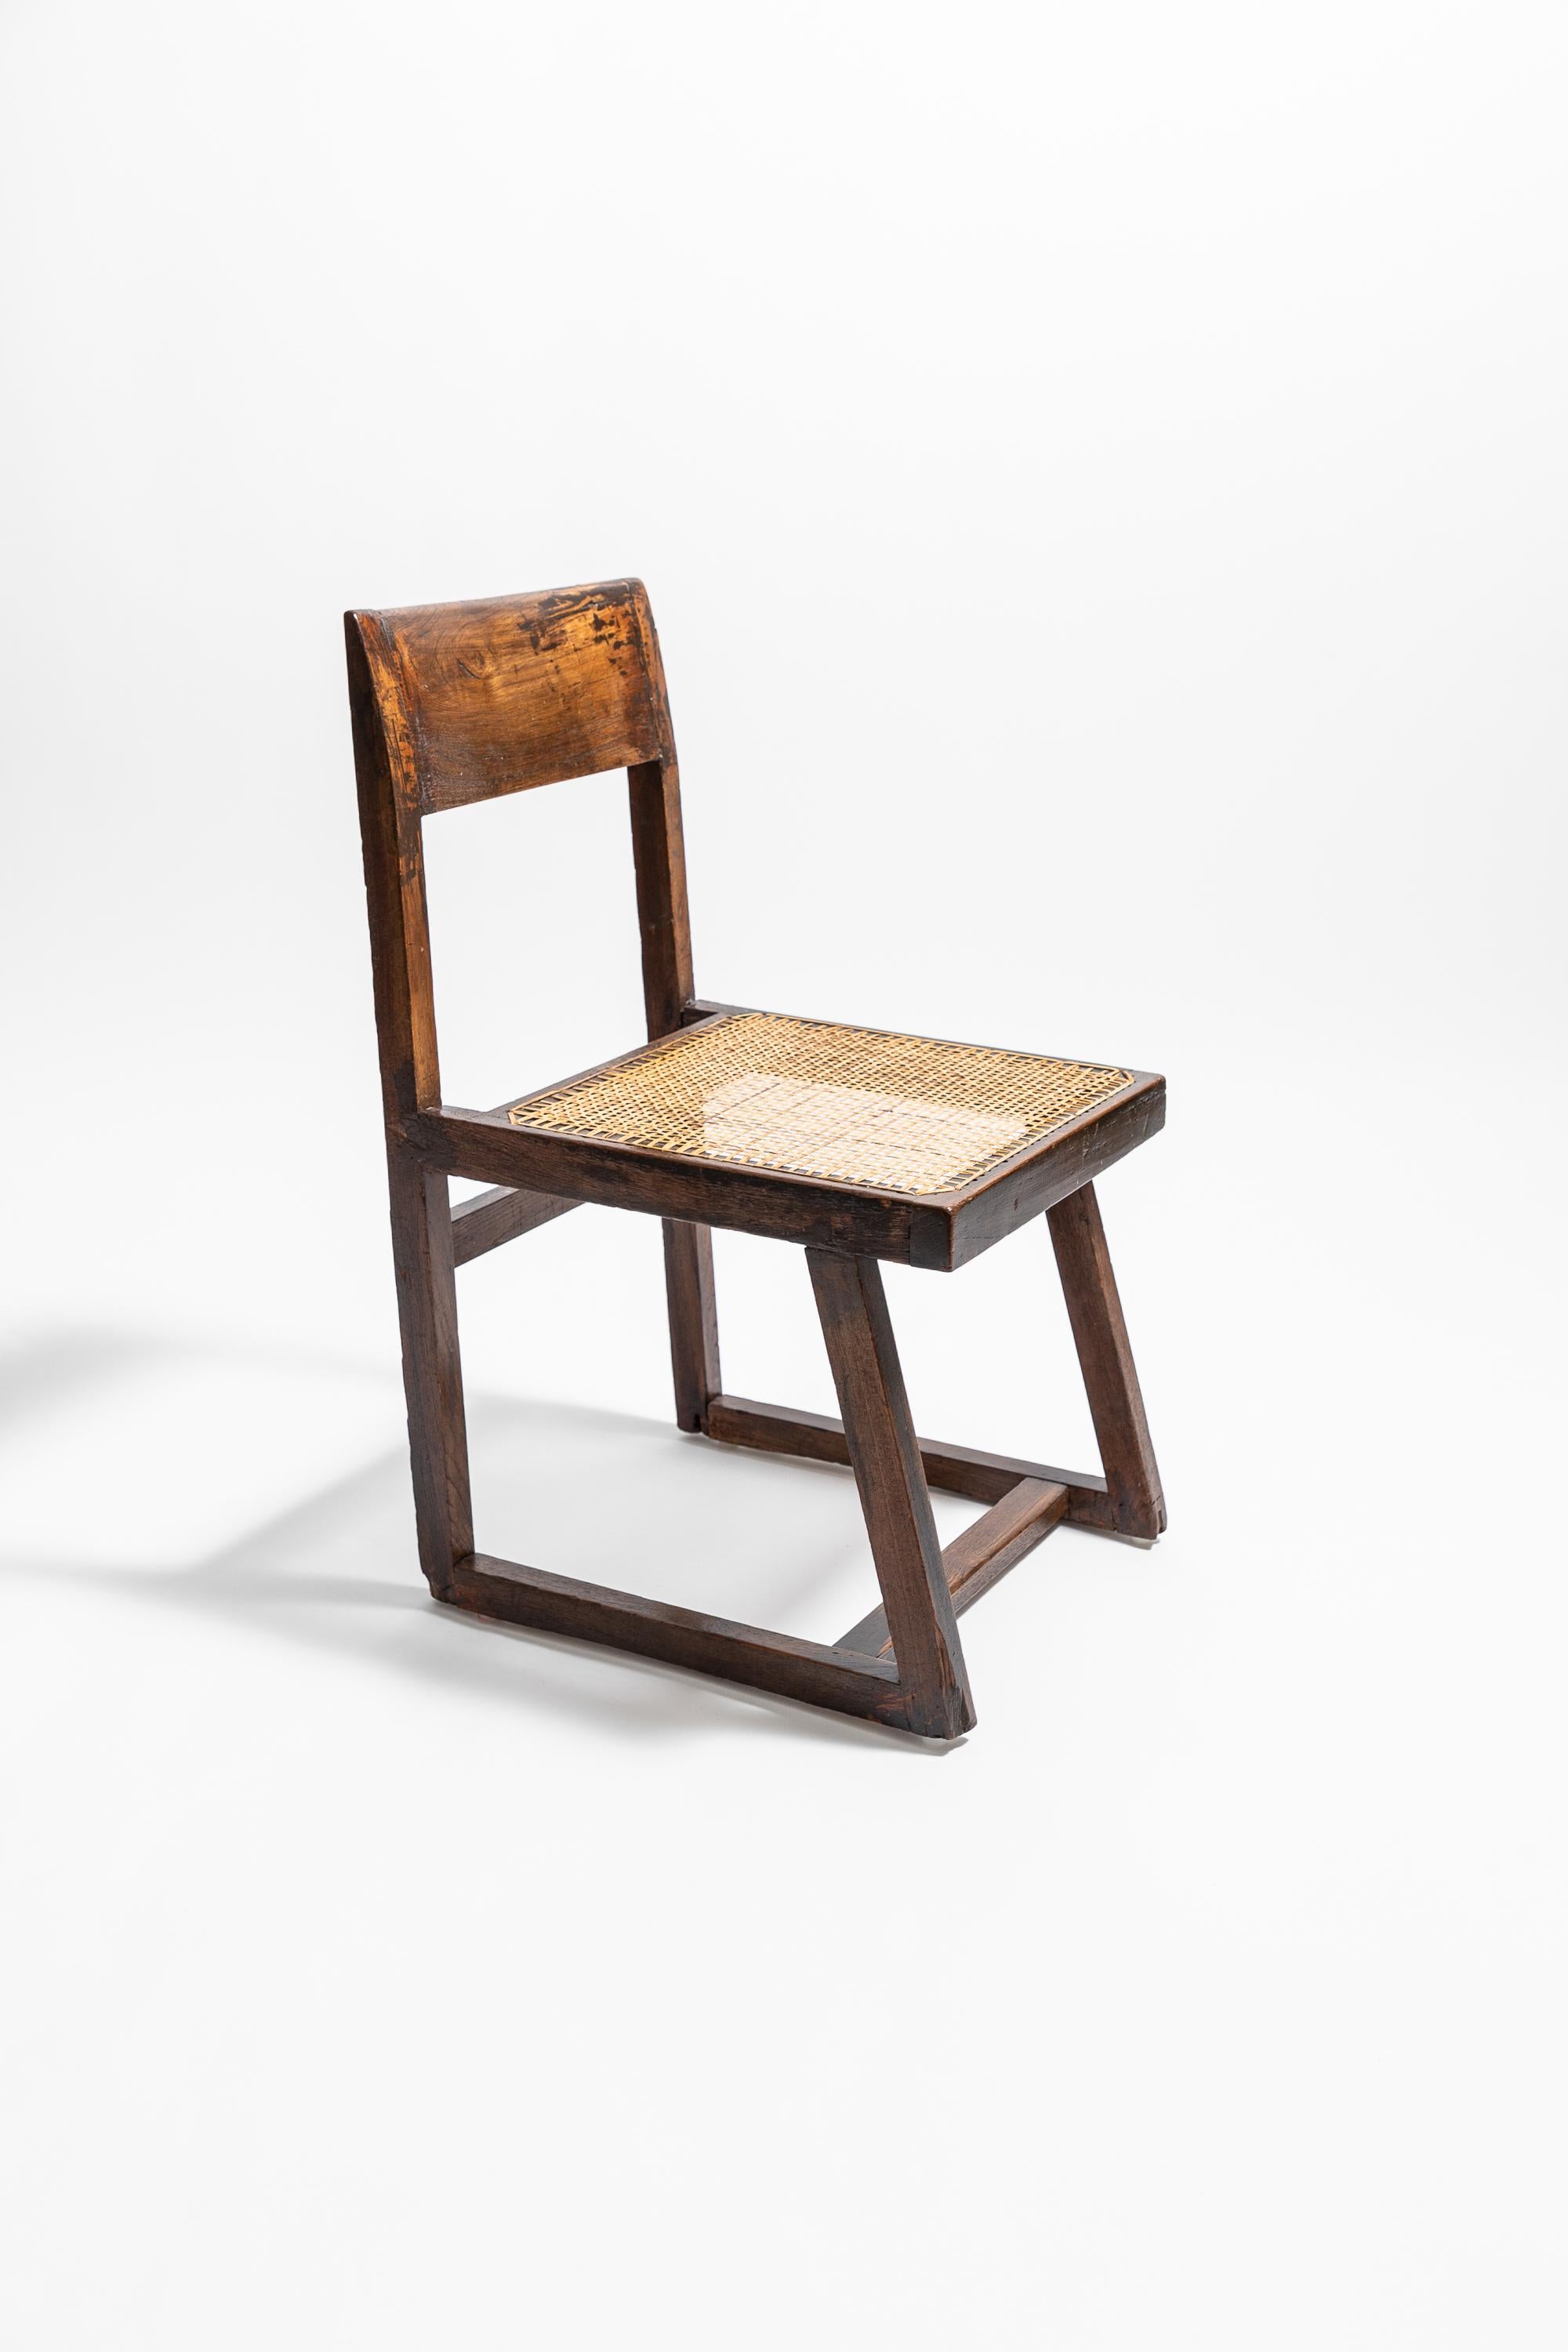 Authentic Chandigarh 'Box' chair in teak, circa 1960. PJ-SI-54-A.

Made in richly coloured teak, lightly restored and re-caned to retain as much of the chair’s original patina as possible. Old knocks, marks and splits have been secured and